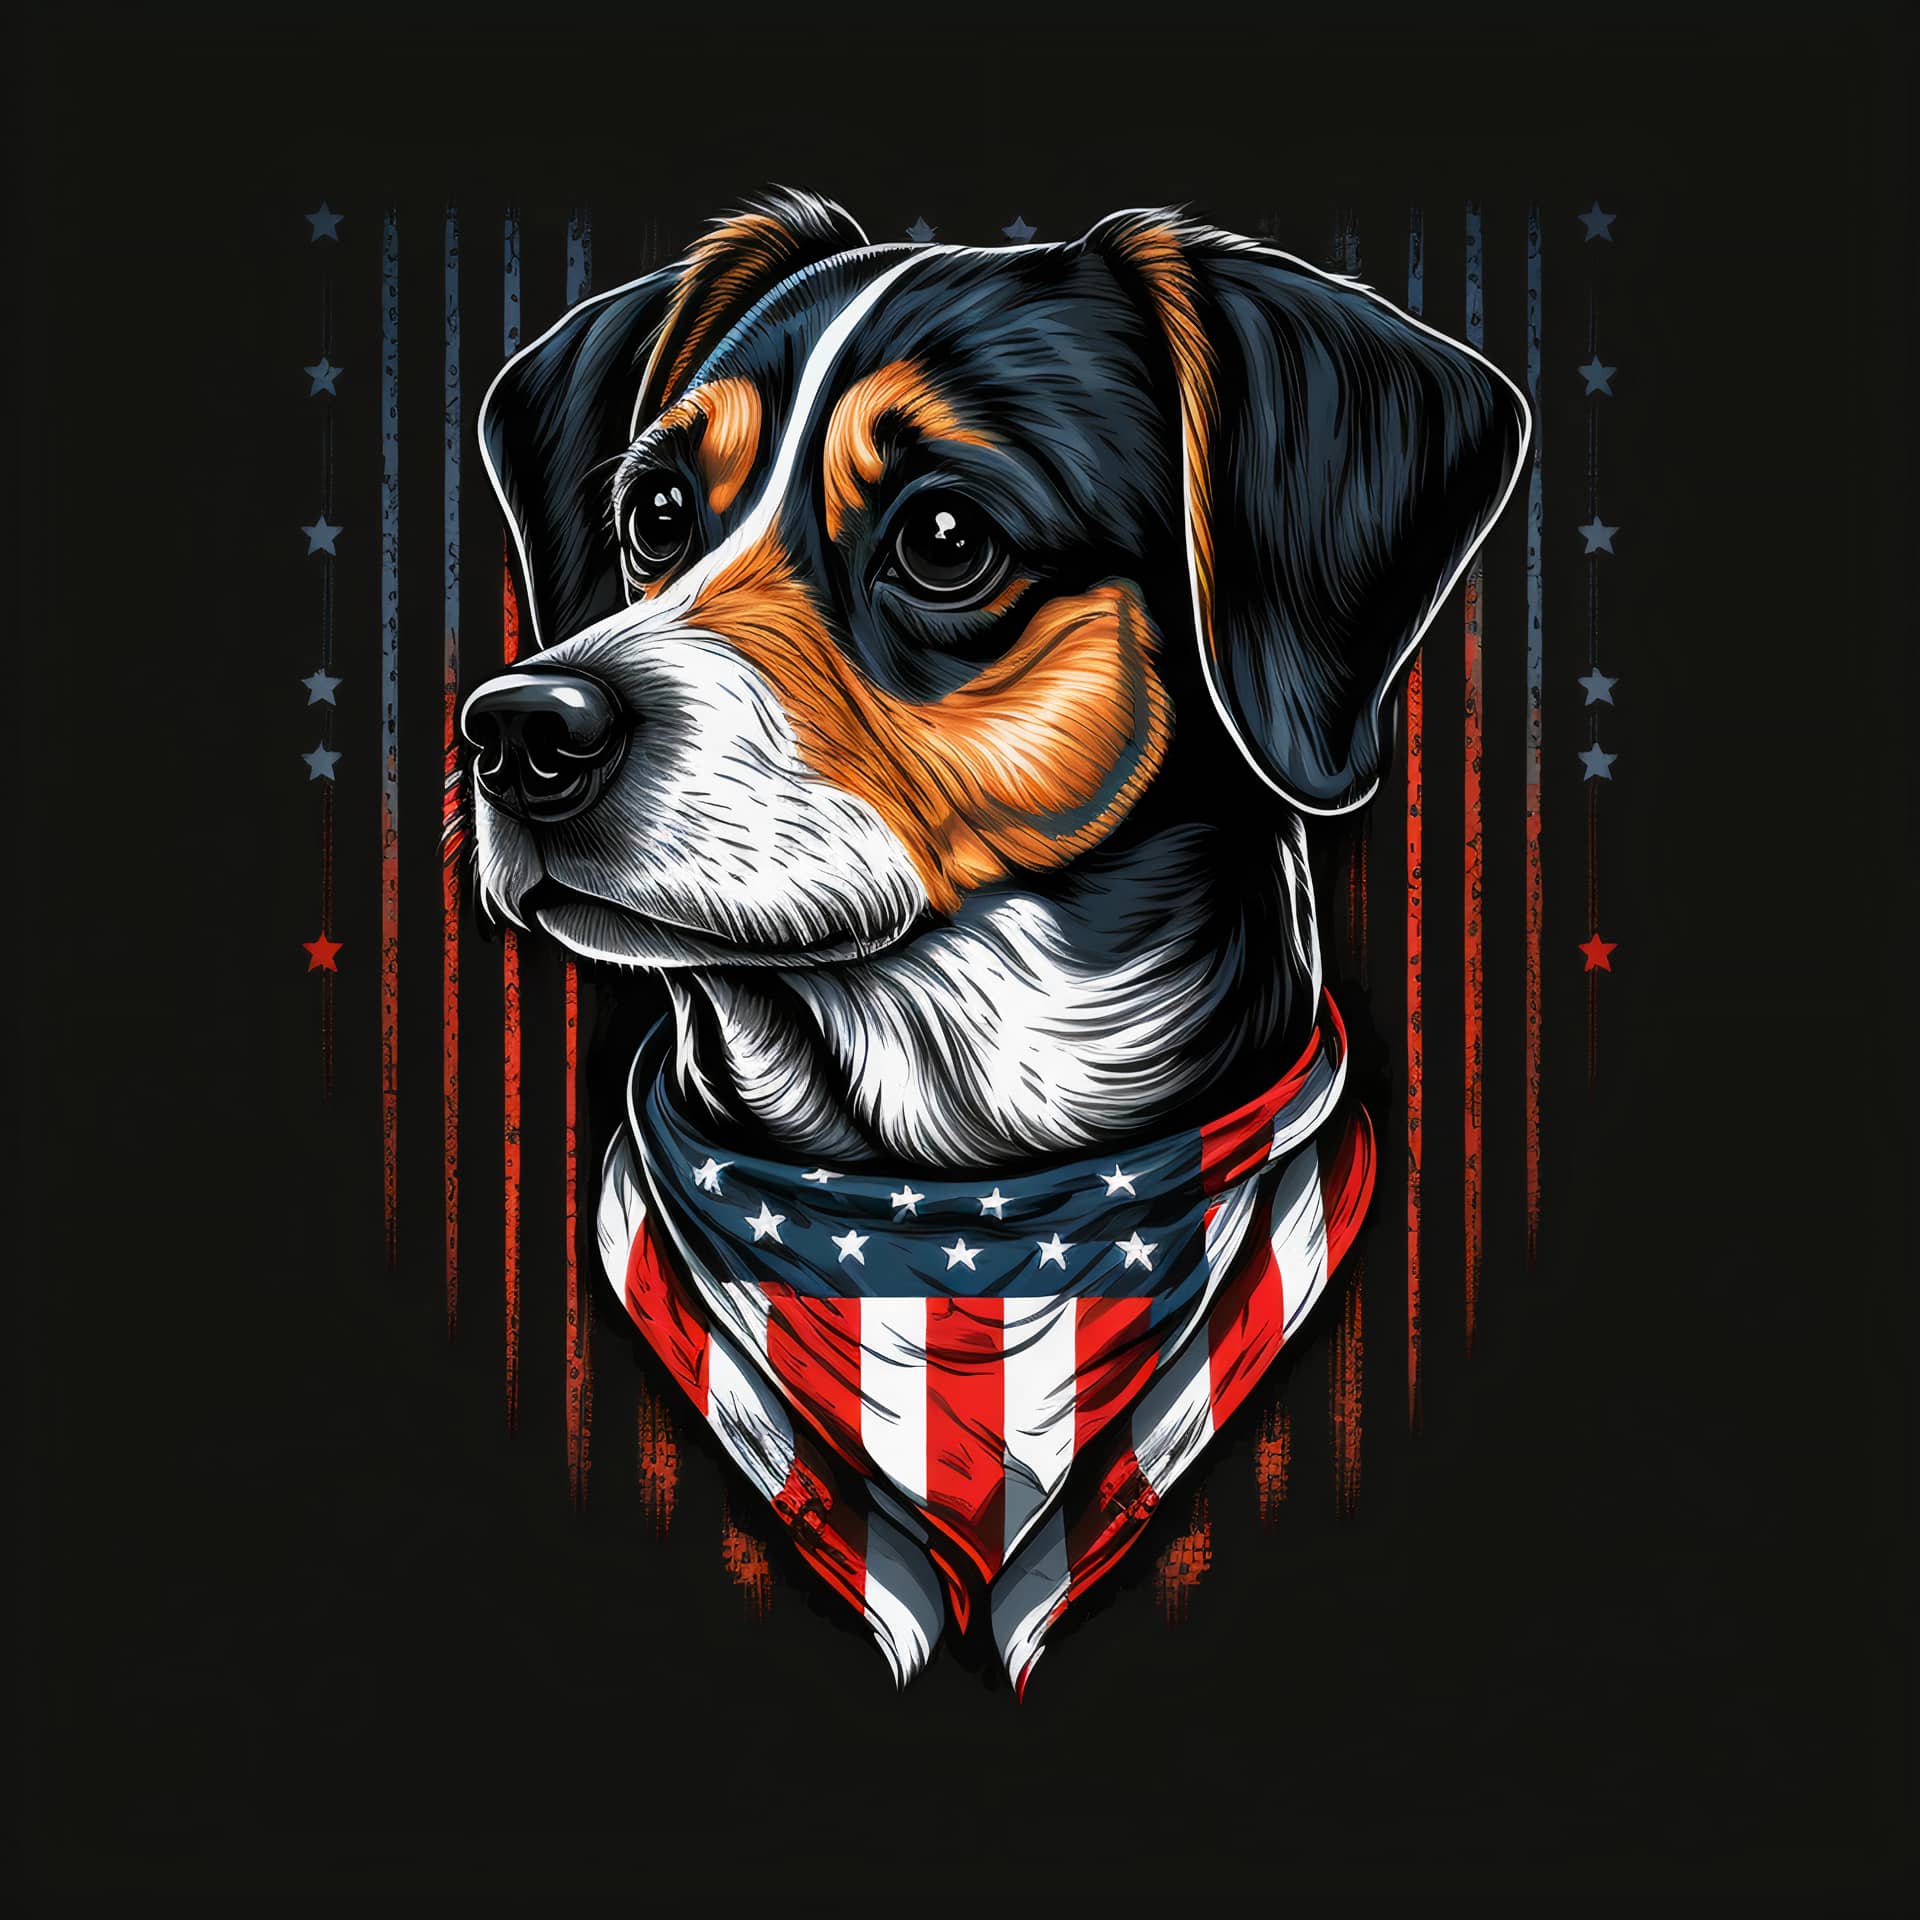 Dog design with american flag fb profile pic